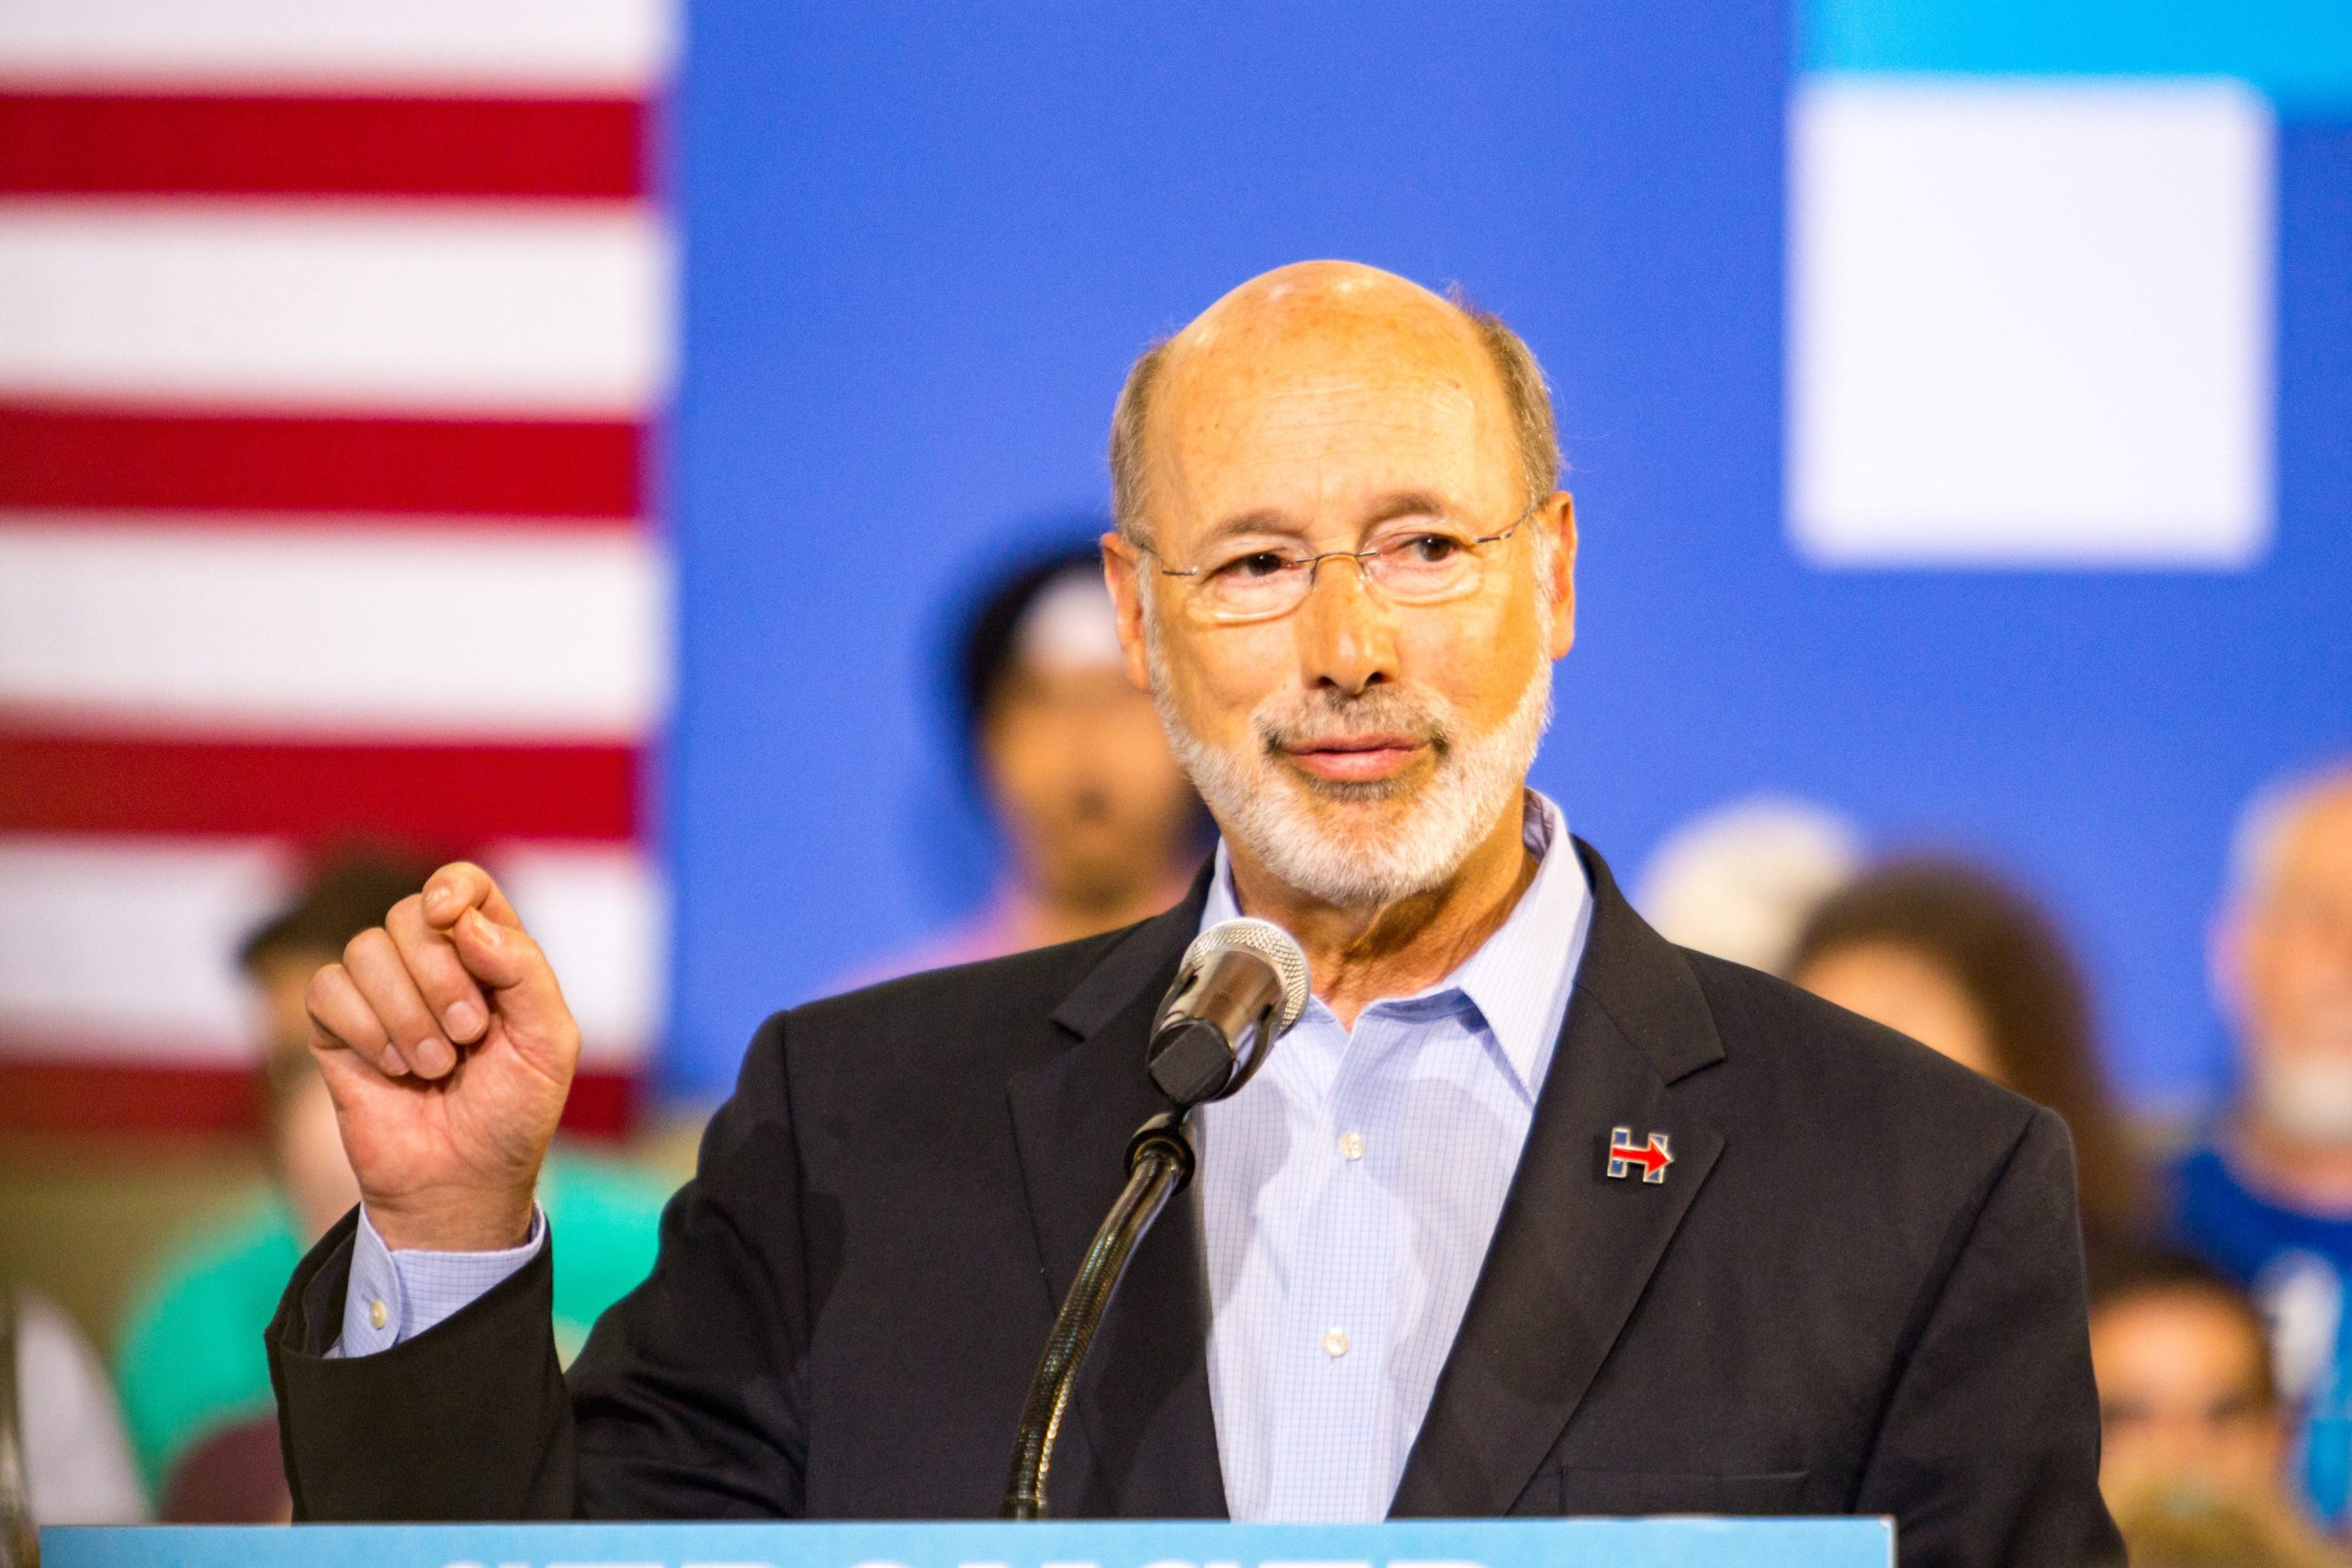 Pennsylvania Gov. Wolf Pardons Over 2,500, Nearly 400 for Nonviolent Cannabis Offenses